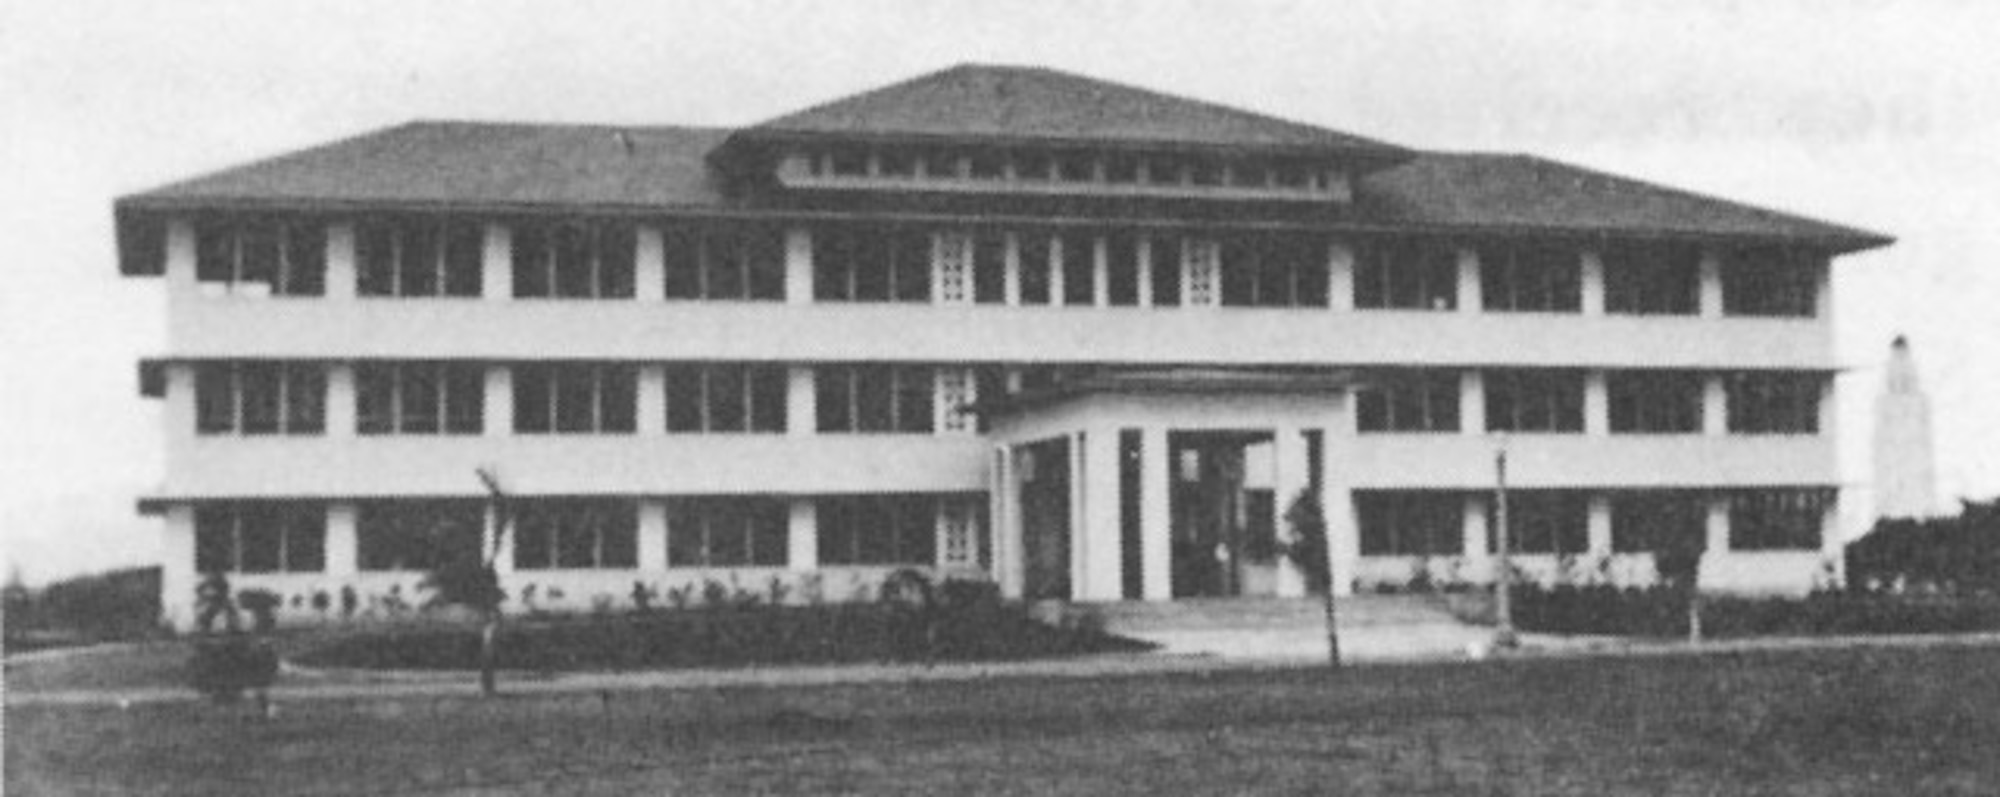 From the first moments of the attack until the close of the day, Hickam's small new hospital, which had opened only a few weeks before, was the focal point of activity on the base.